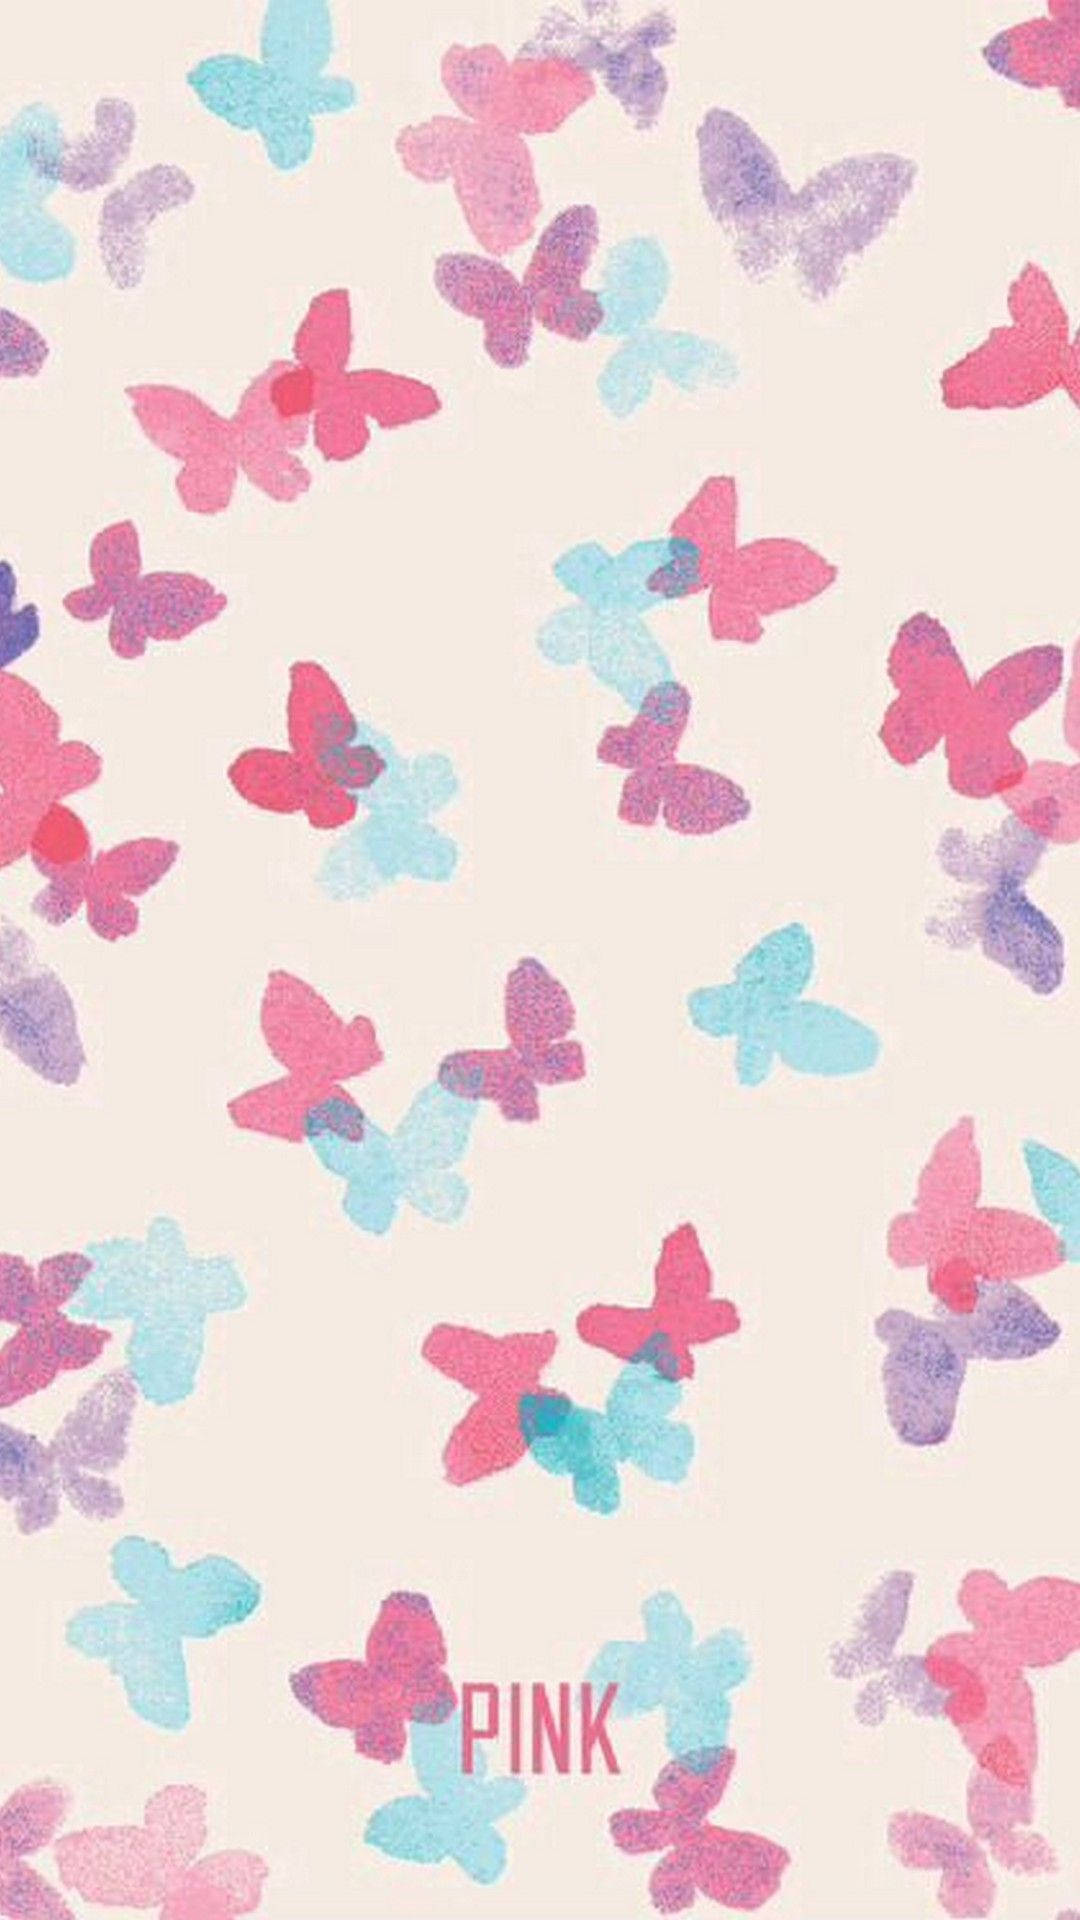 Aesthetic Girly Multicolored Butterflies Background